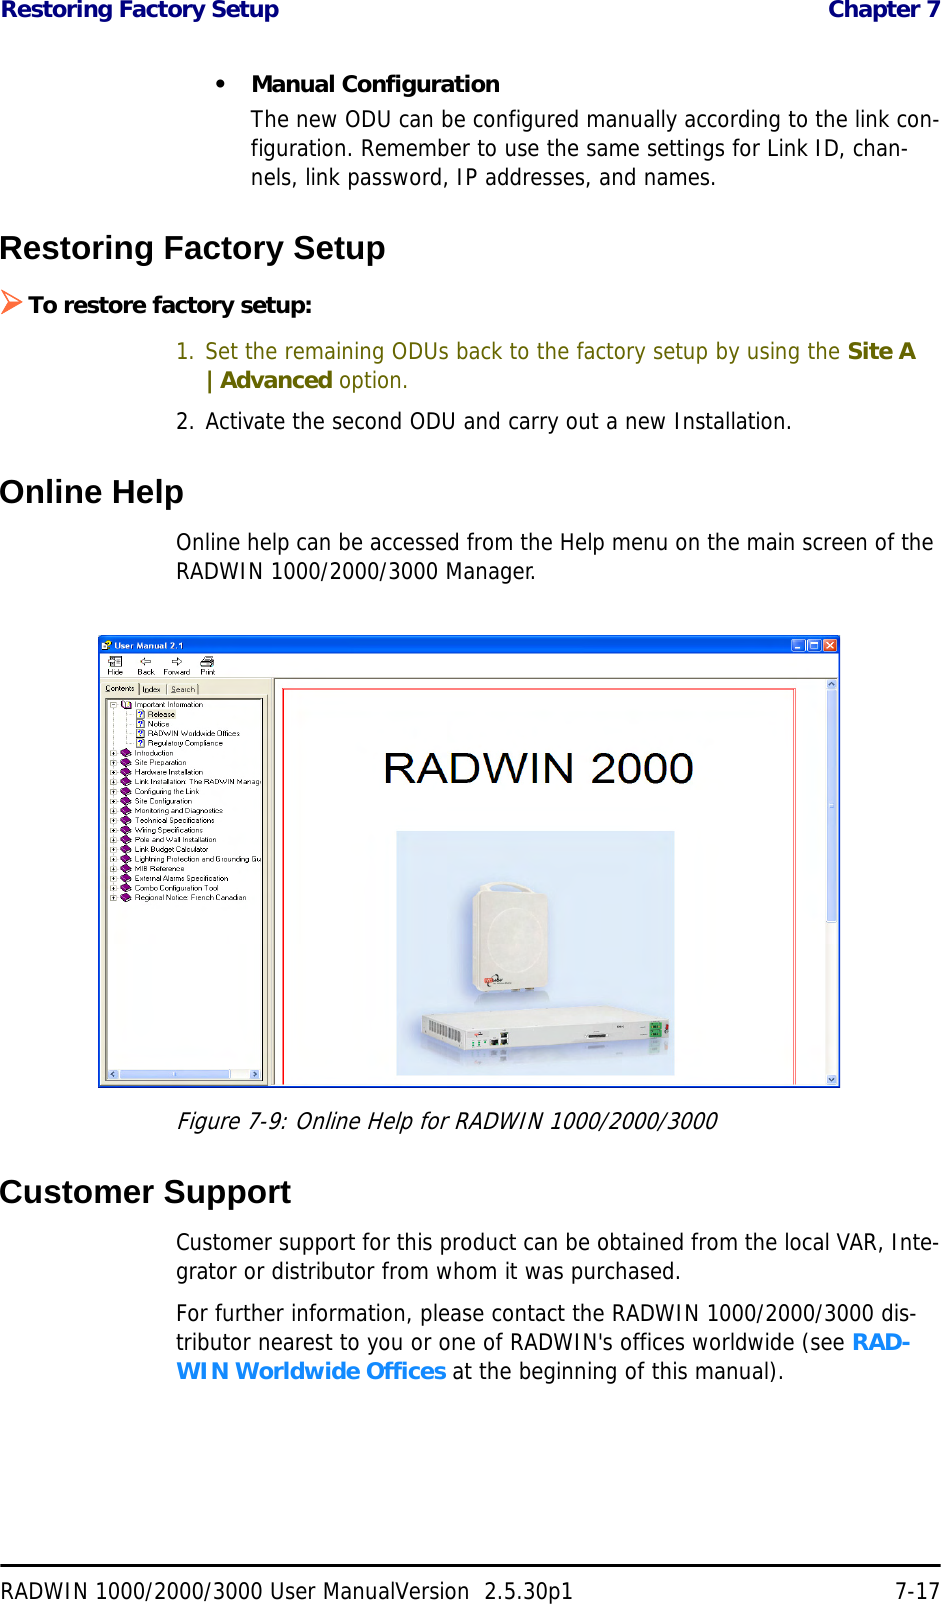 Restoring Factory Setup  Chapter 7RADWIN 1000/2000/3000 User ManualVersion  2.5.30p1 7-17• Manual ConfigurationThe new ODU can be configured manually according to the link con-figuration. Remember to use the same settings for Link ID, chan-nels, link password, IP addresses, and names. Restoring Factory Setup¾To restore factory setup:1. Set the remaining ODUs back to the factory setup by using the Site A |Advanced option.2. Activate the second ODU and carry out a new Installation.Online HelpOnline help can be accessed from the Help menu on the main screen of the RADWIN 1000/2000/3000 Manager.Figure 7-9: Online Help for RADWIN 1000/2000/3000Customer SupportCustomer support for this product can be obtained from the local VAR, Inte-grator or distributor from whom it was purchased.For further information, please contact the RADWIN 1000/2000/3000 dis-tributor nearest to you or one of RADWIN&apos;s offices worldwide (see RAD-WIN Worldwide Offices at the beginning of this manual).